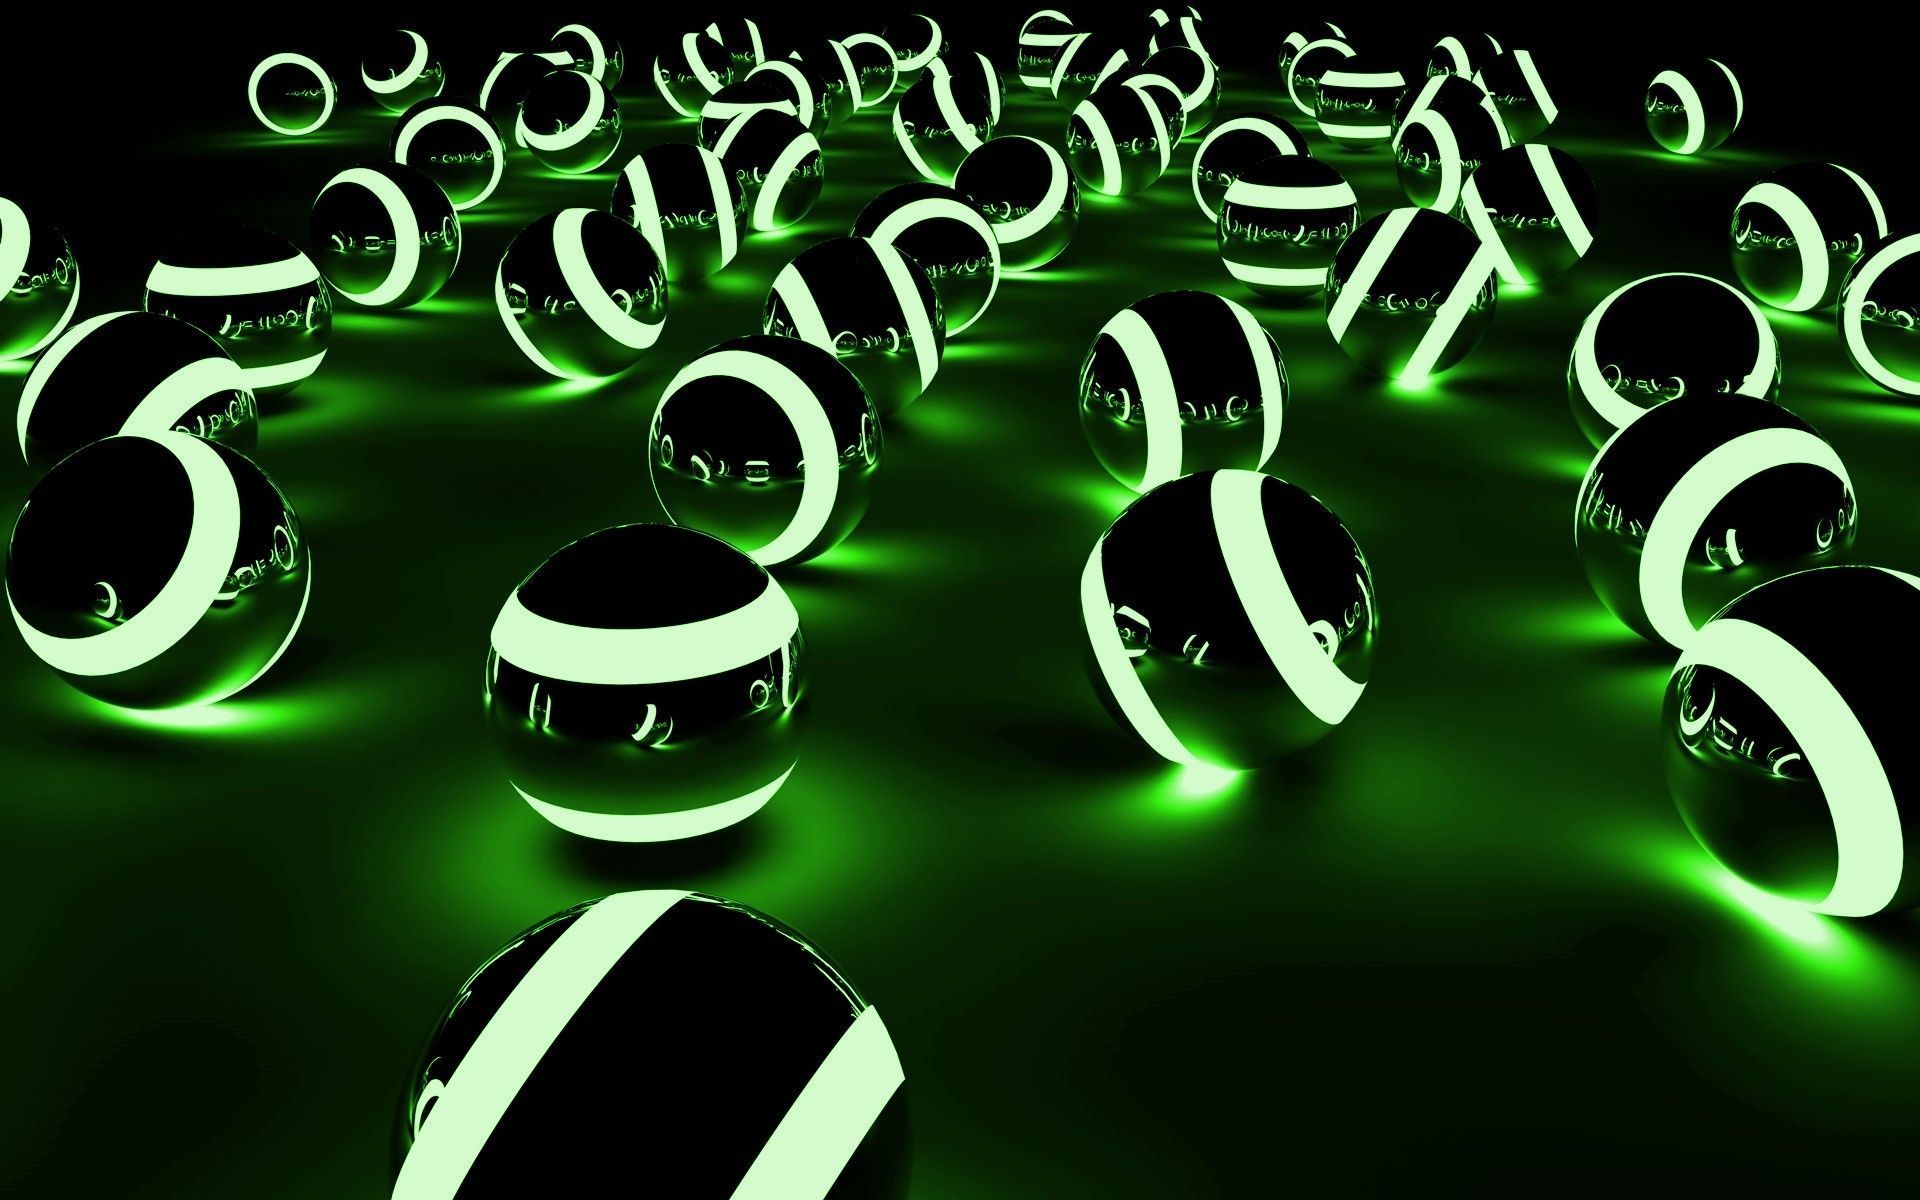 Green Neon HD Backgrounds